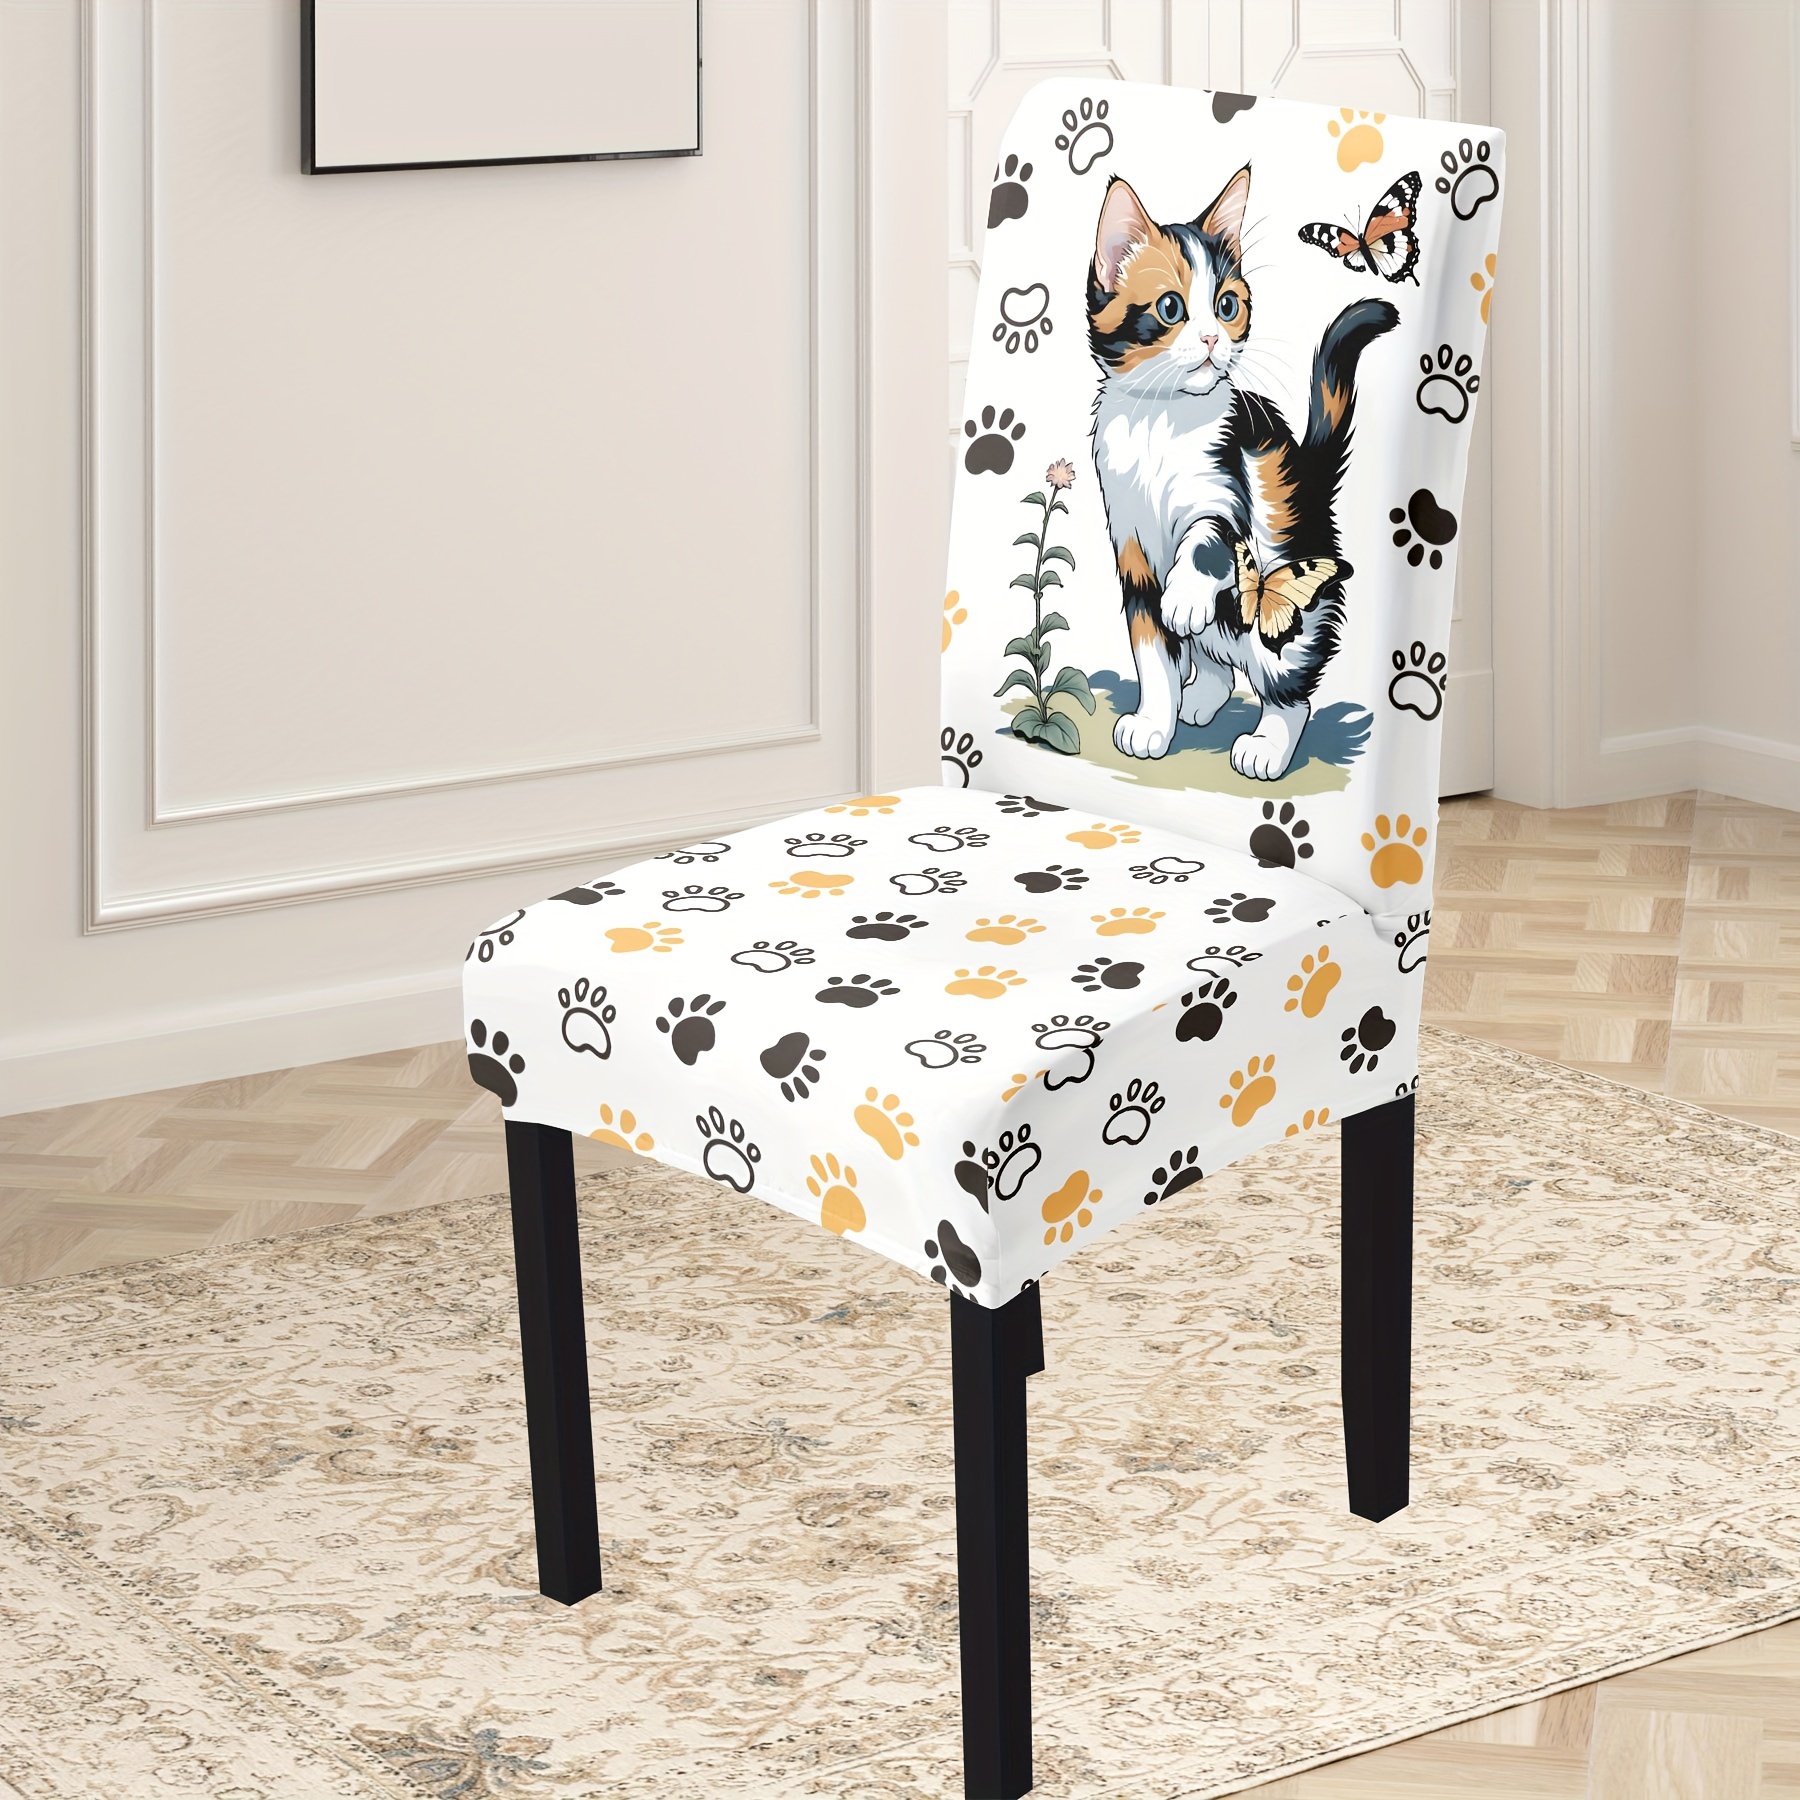 

4/6-piece Playful Cat Paw Print Chair Covers - Stretchy Milk Silk Fabric, Dustproof & Washable Slipcovers For Dining Chairs - Vintage Style, Easy Care